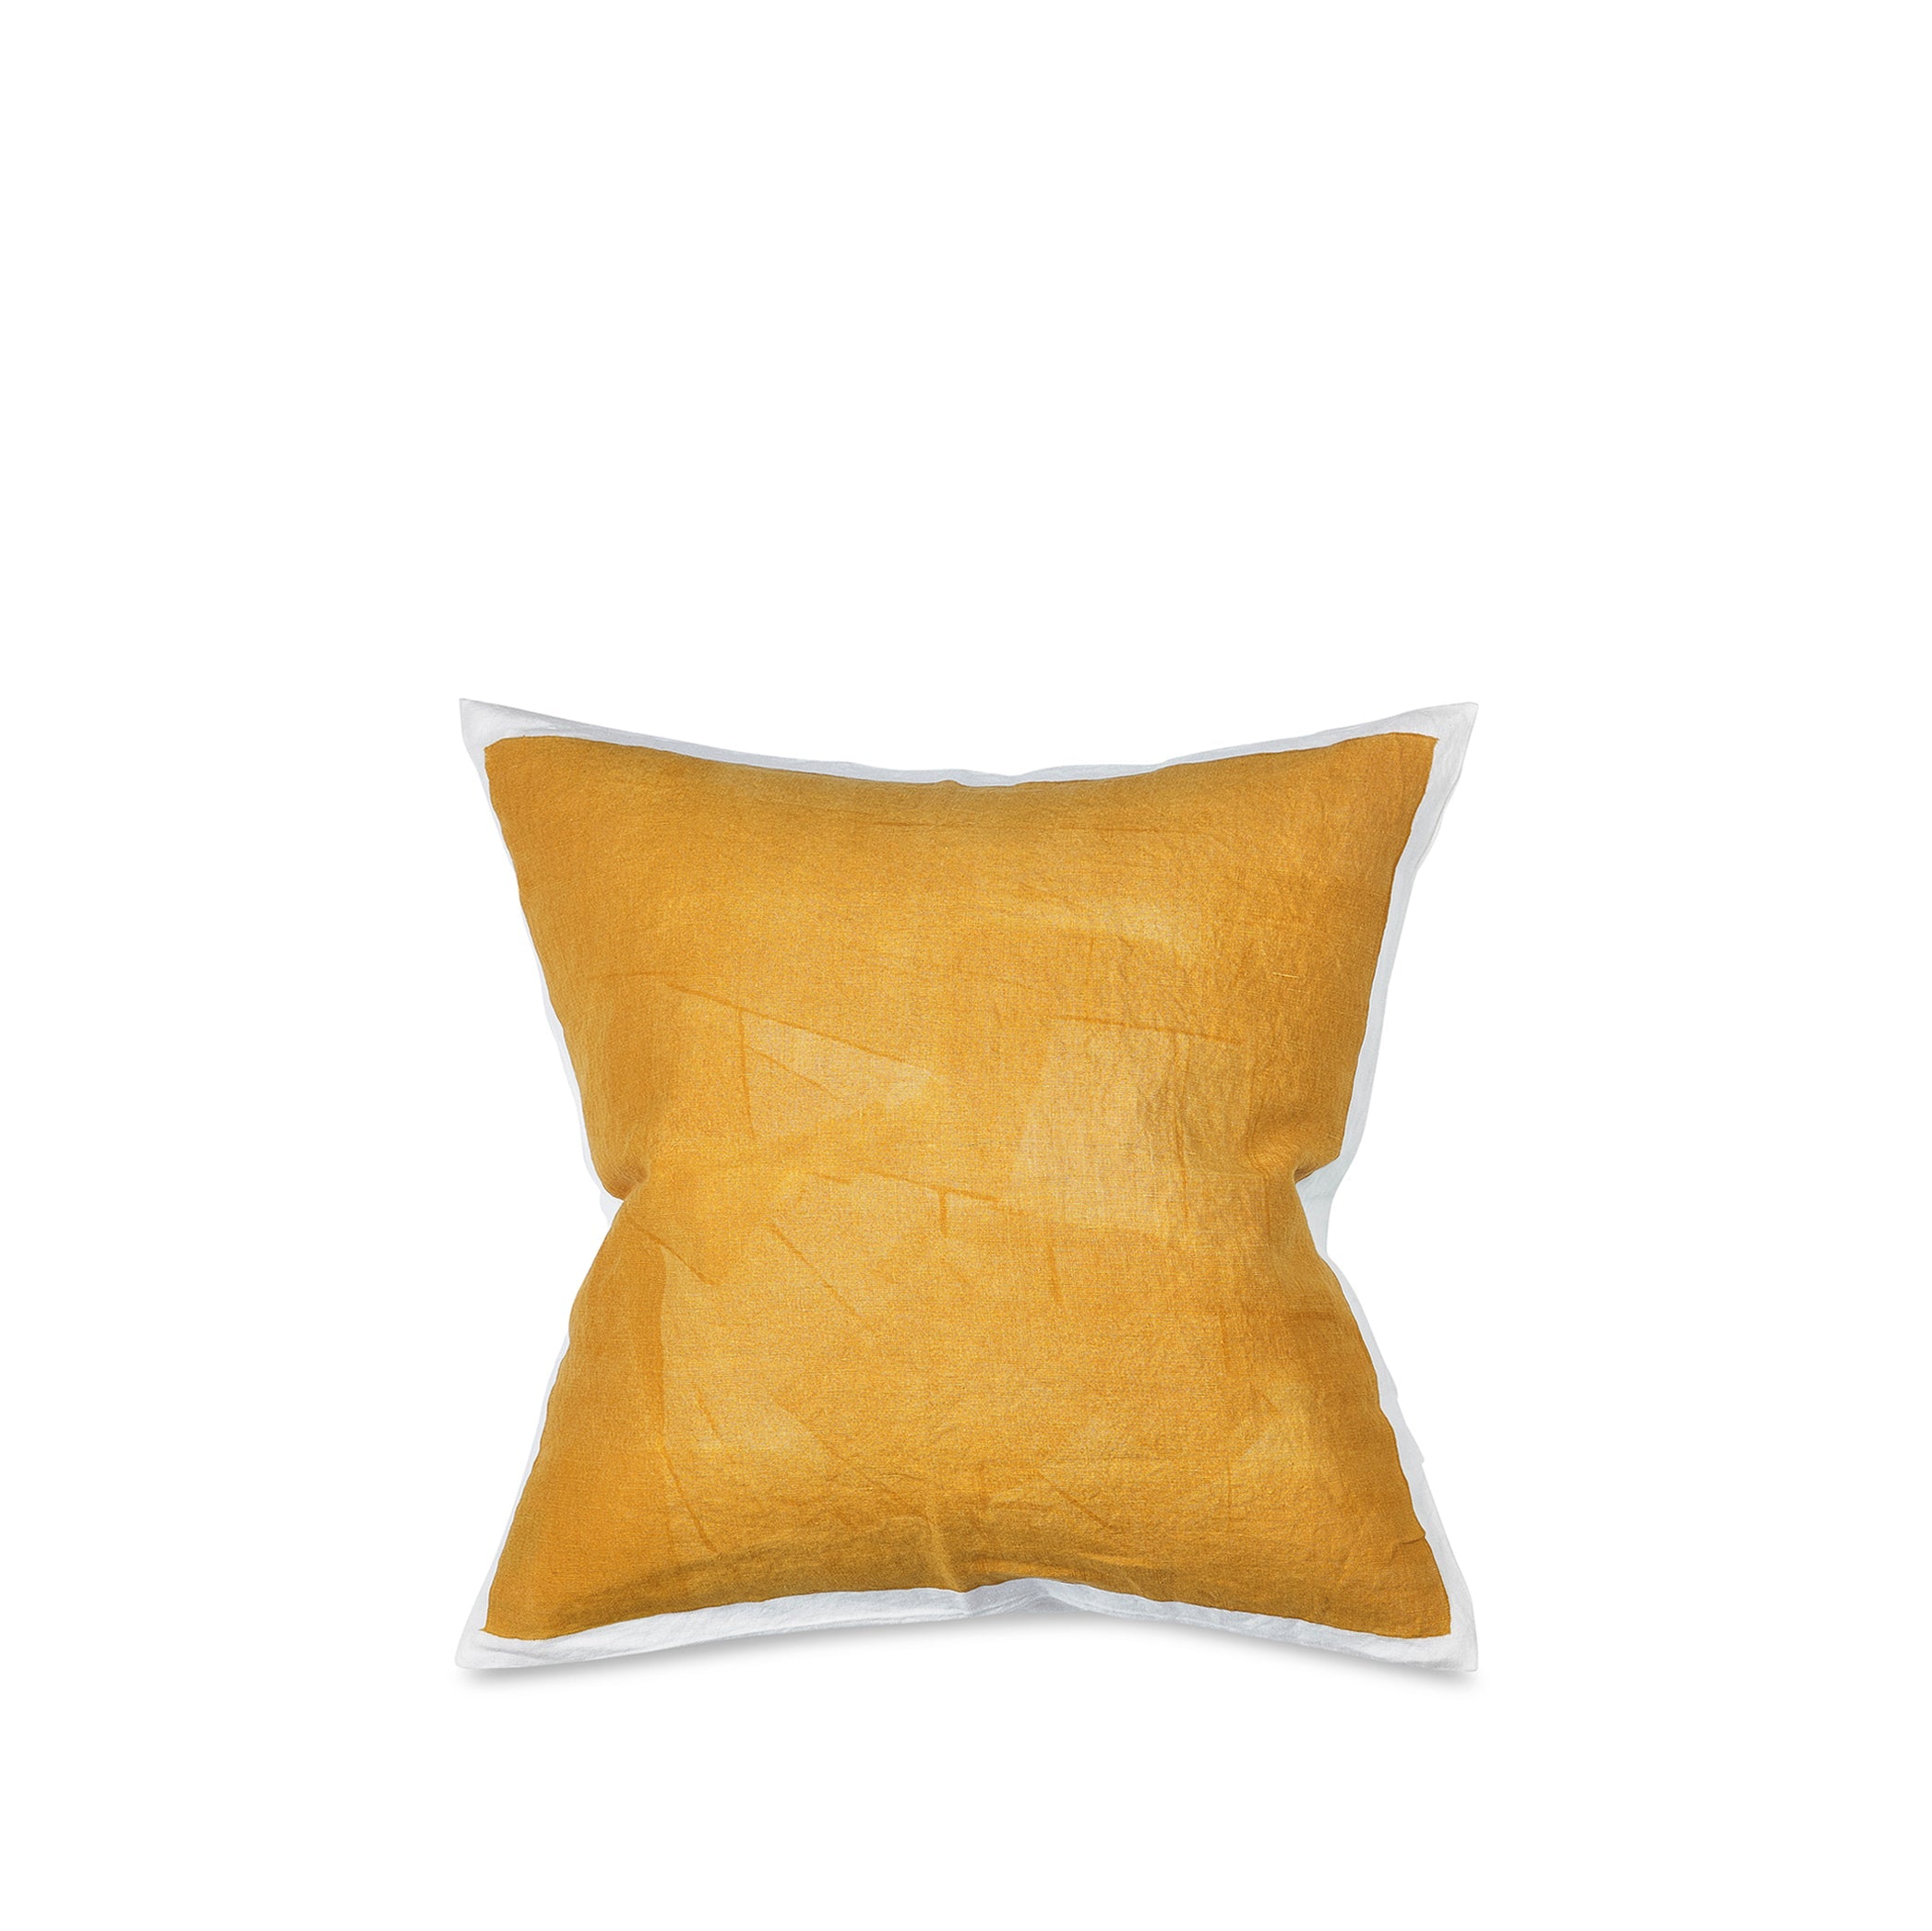 Hand Painted Linen Cushion in Mustard Yellow, 50cm x 50cm